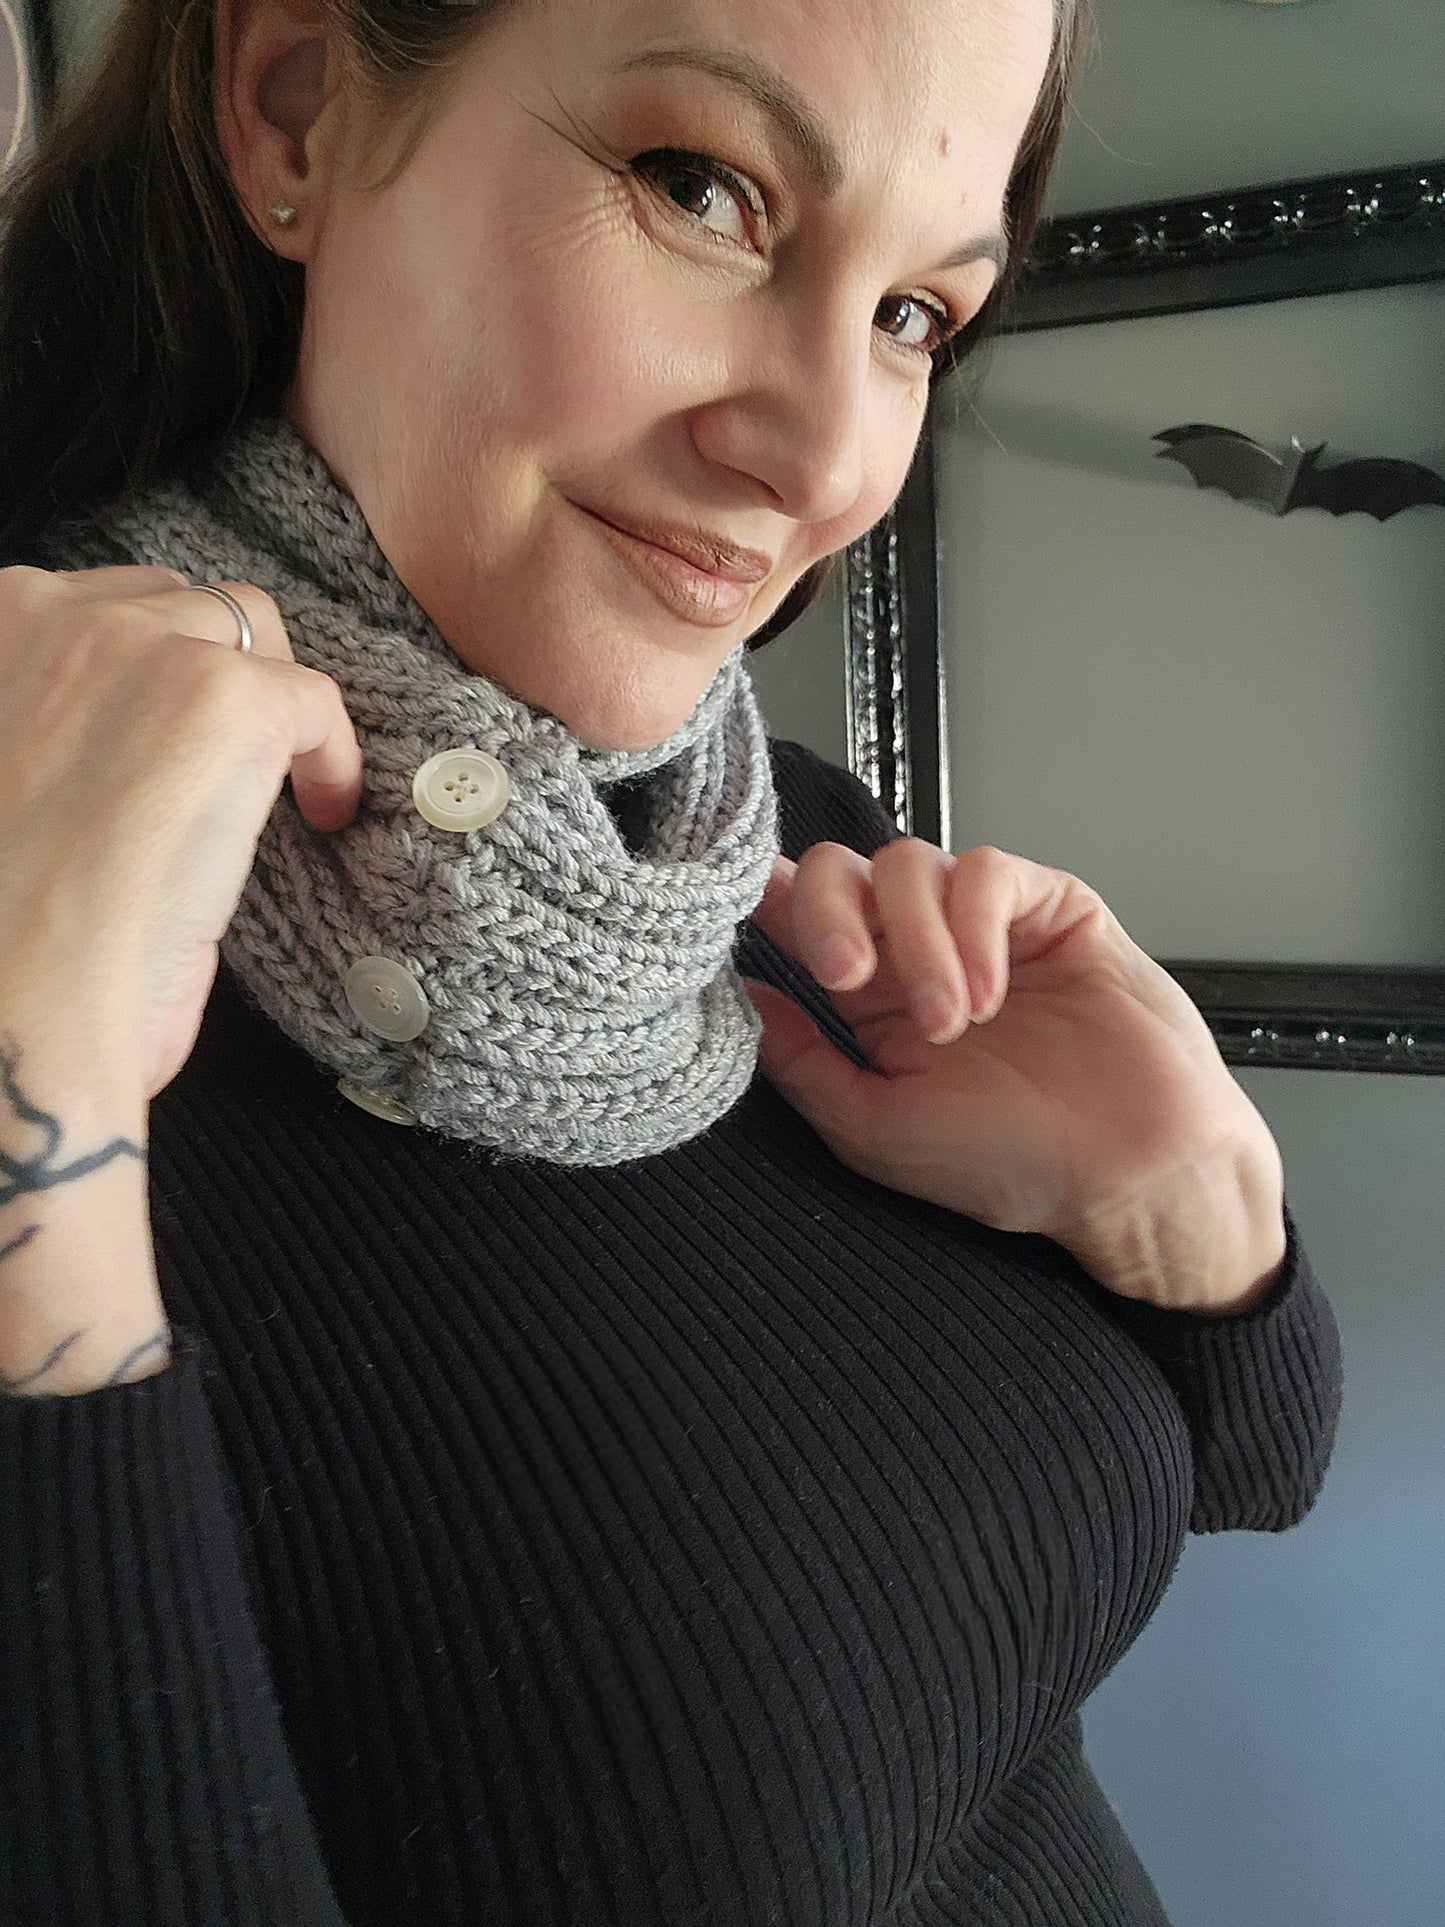 The "Frost" Hand Knit Infinity Scarf